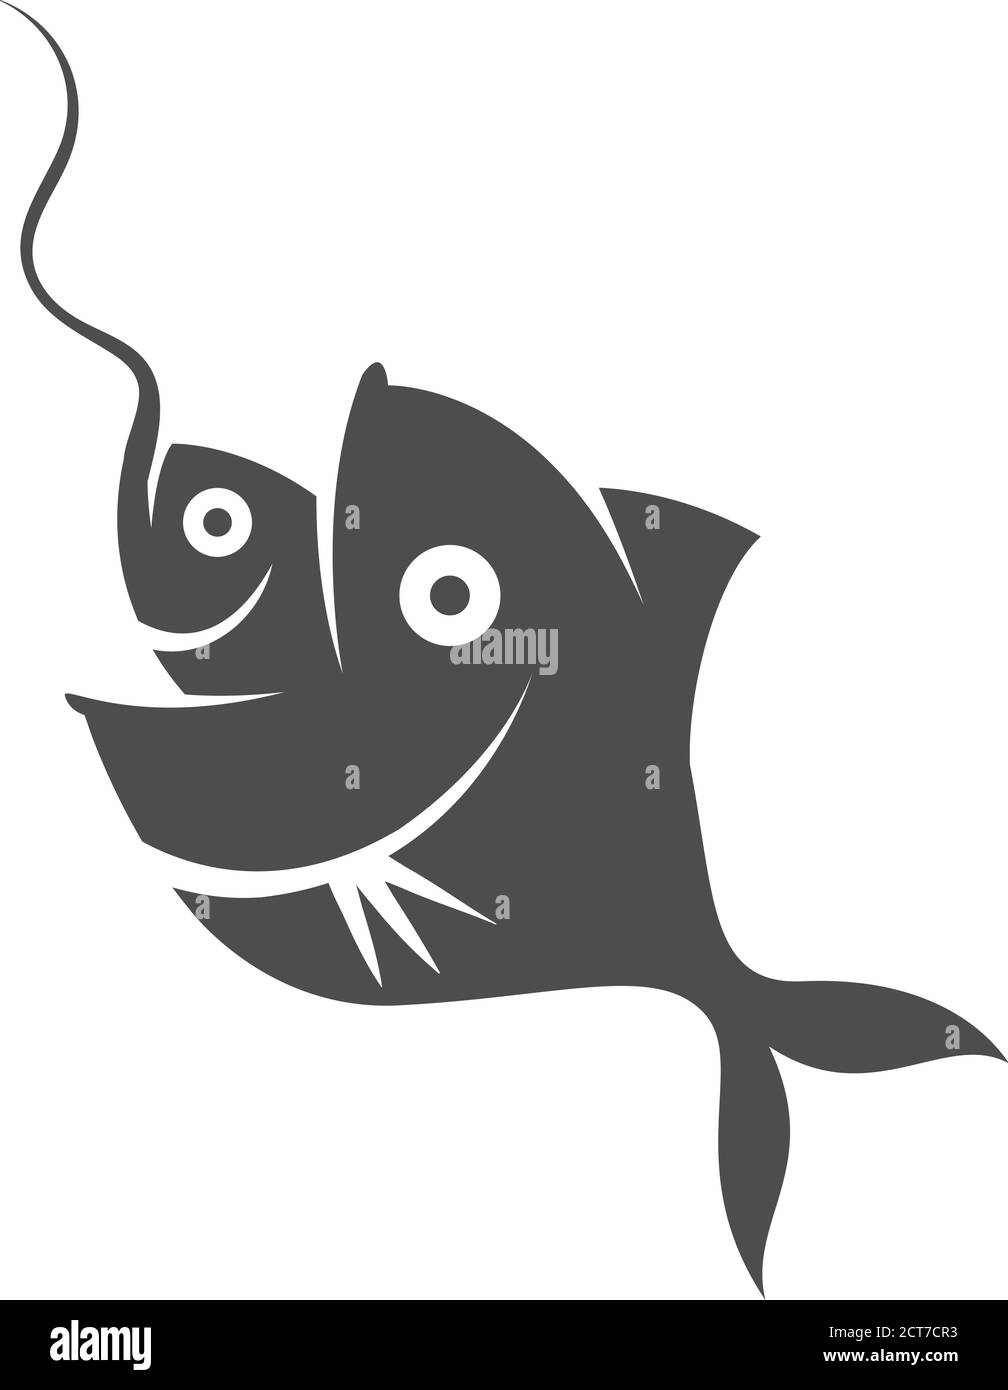 Fish eating bait icon in black and white. Business metaphor. Vector illustration. Stock Vector